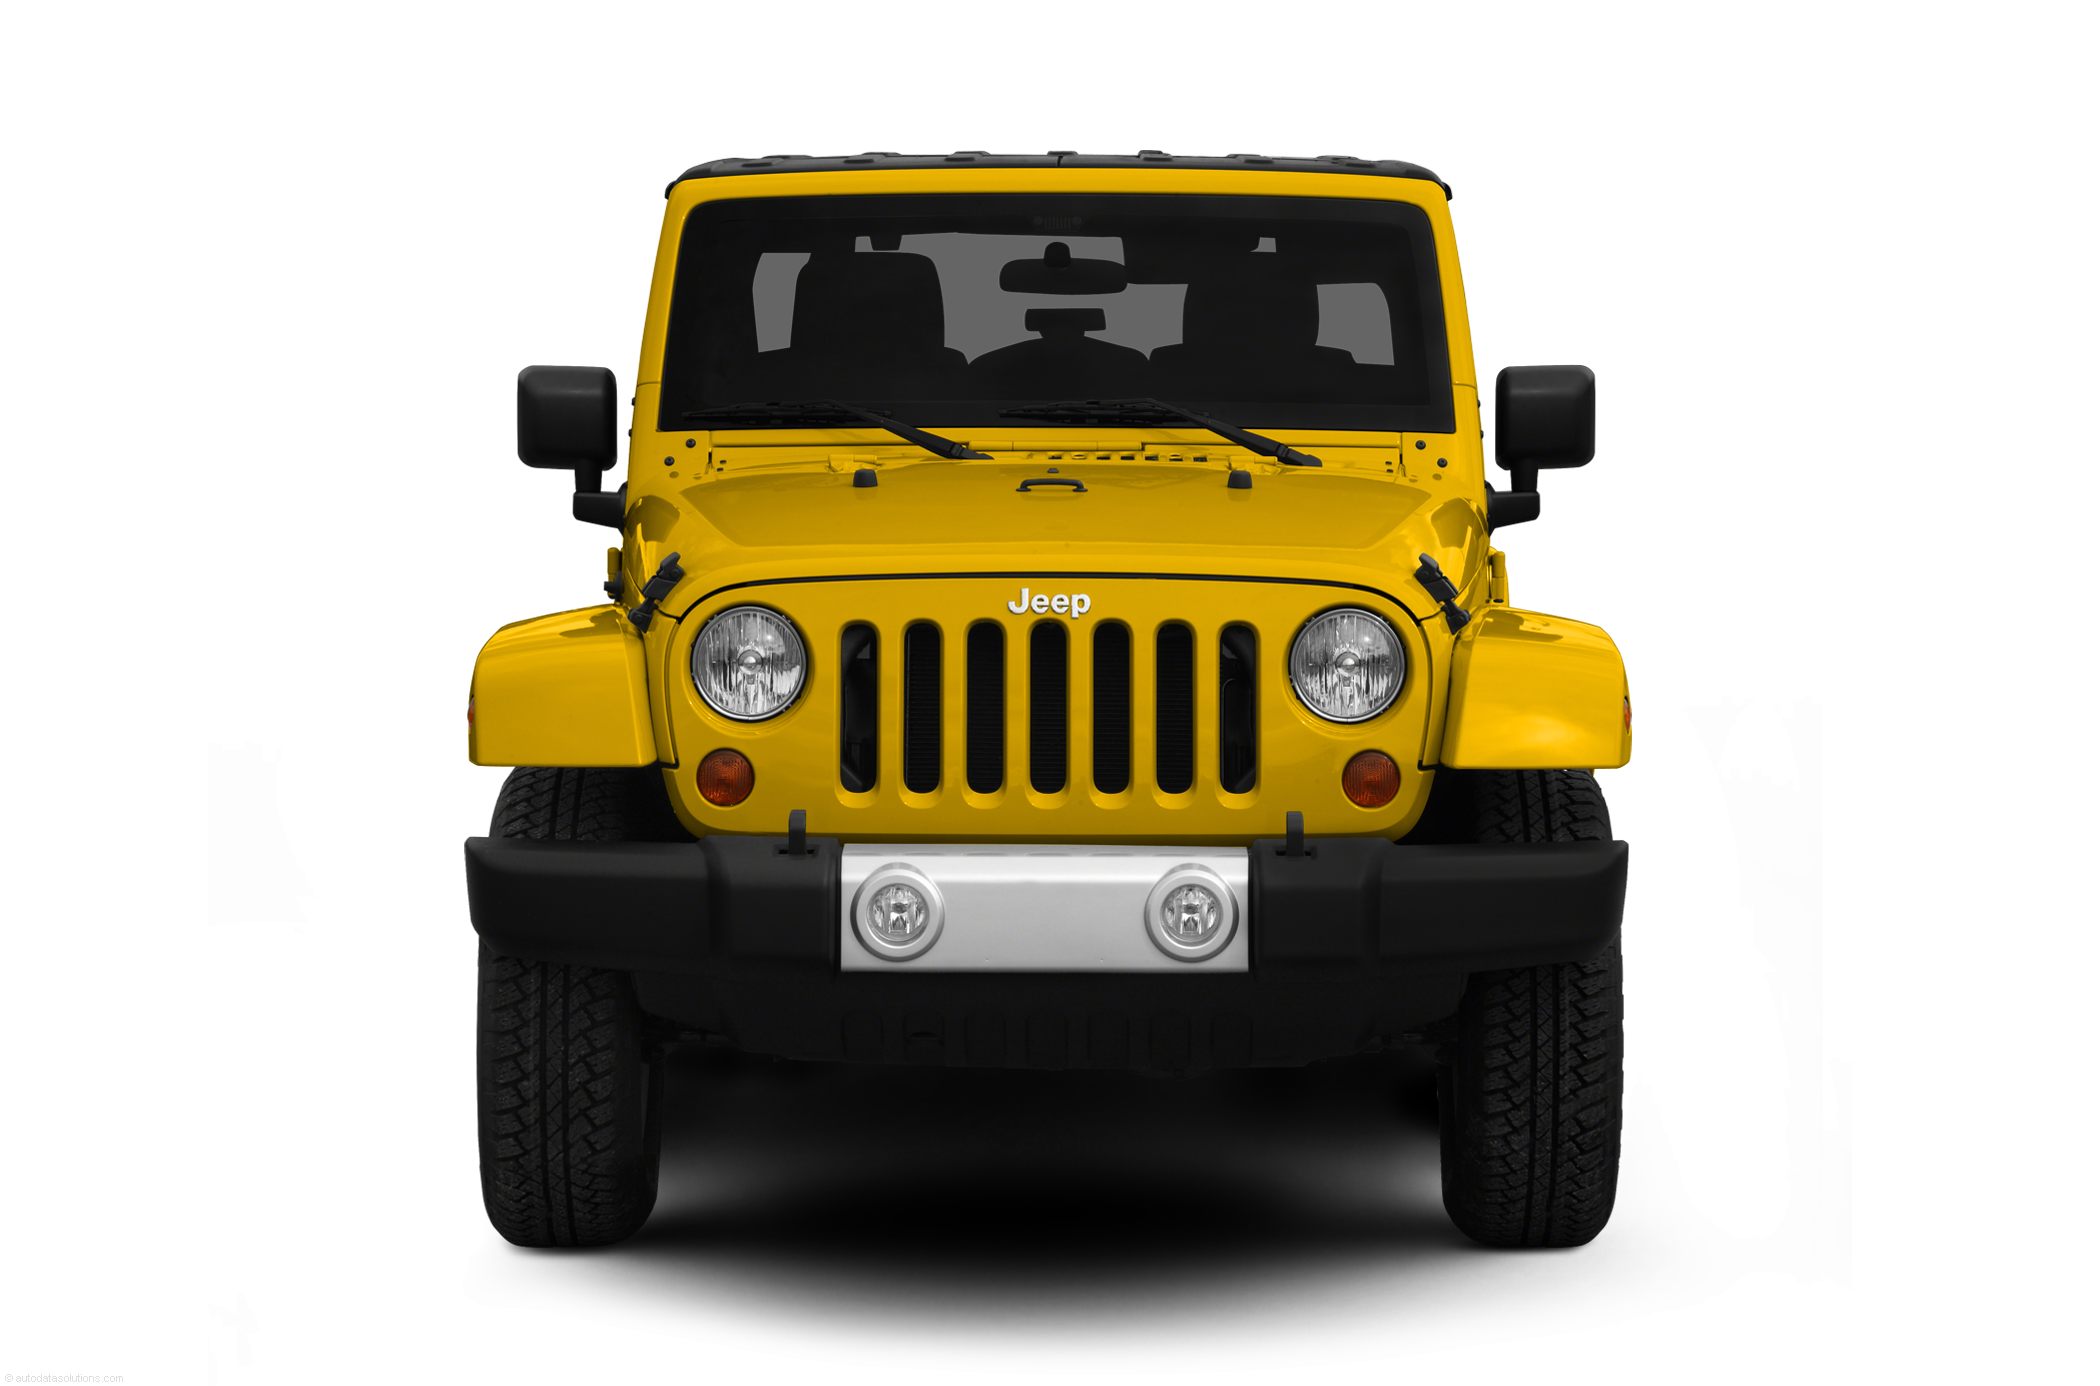 2011 Jeep Wrangler Unlimited - Price, Photos, Reviews & Features